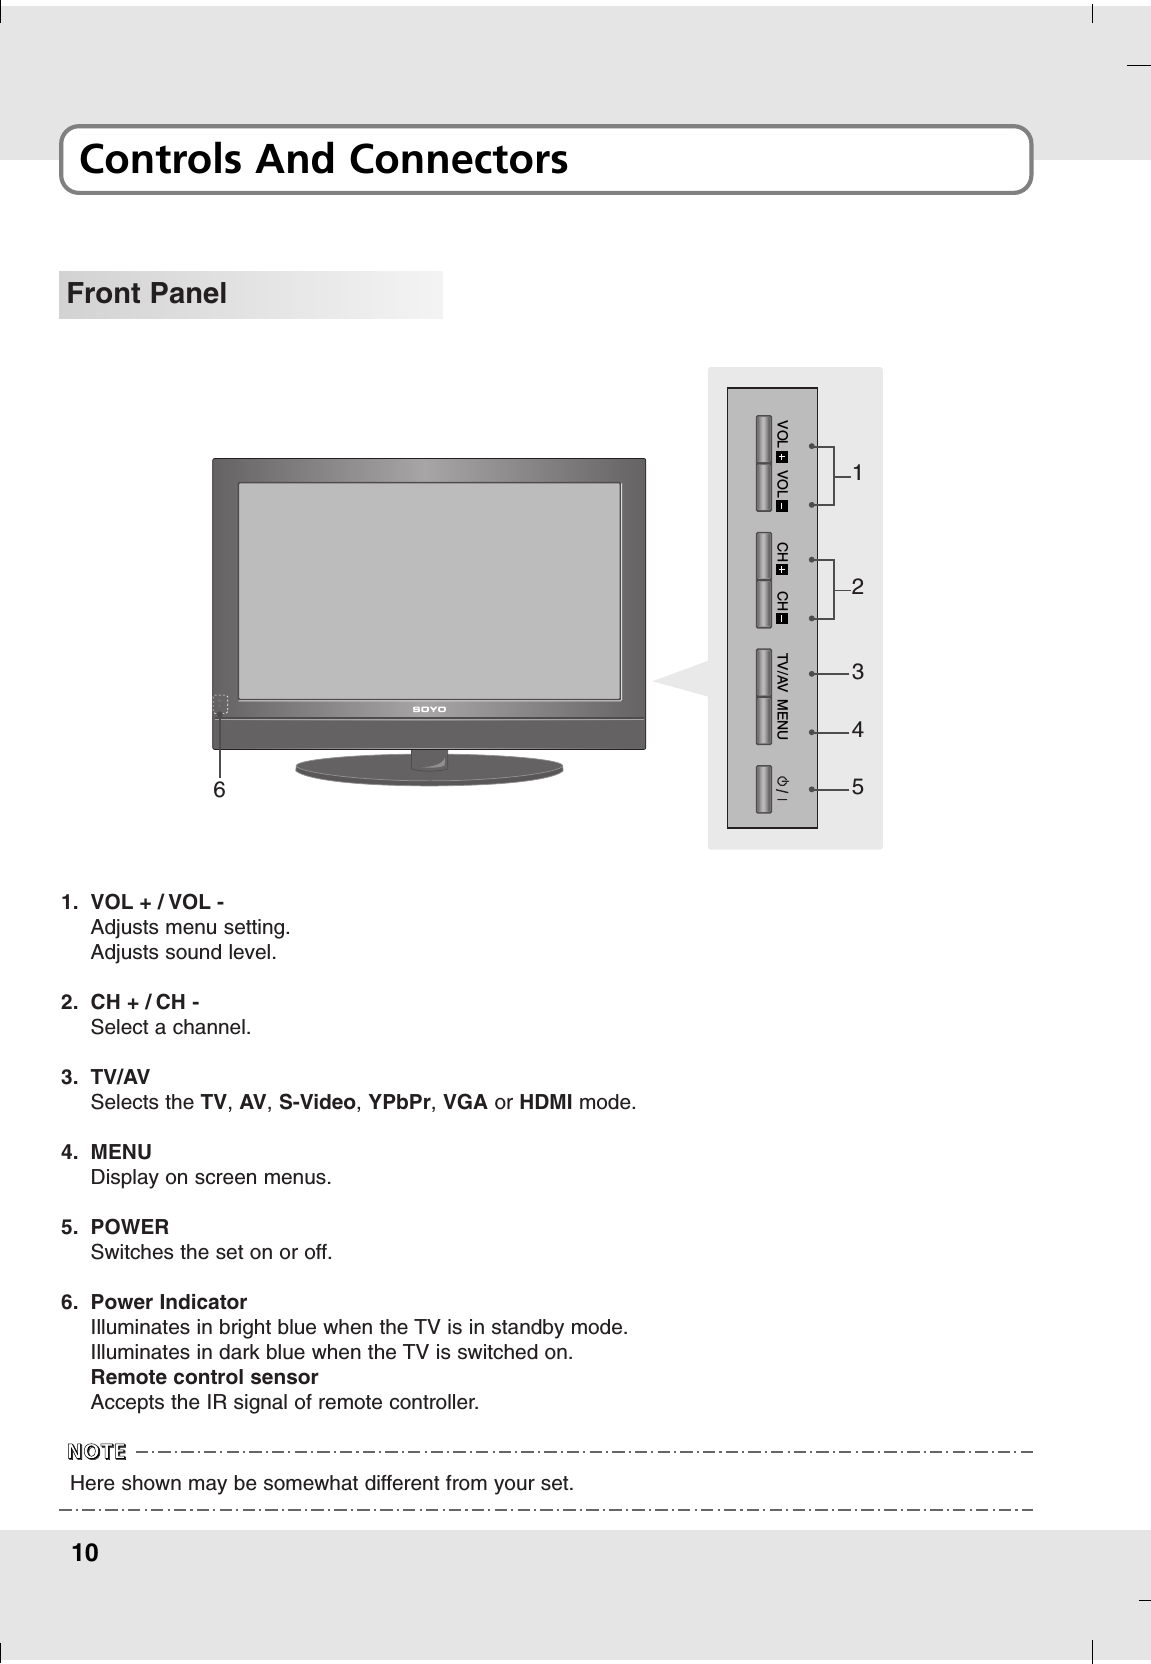 10Controls And ConnectorsFront Panel 612345VOL VOL CH CH TV/AV MENU1. VOL + / VOL -Adjusts menu setting.Adjusts sound level.2. CH + / CH - Select a channel.3. TV/AVSelects the TV, AV,S-Video, YPbPr,VGA or HDMI mode.4. MENUDisplay on screen menus.5. POWERSwitches the set on or off.6. Power IndicatorIlluminates in bright blue when the TV is in standby mode.Illuminates in dark blue when the TV is switched on.Remote control sensorAccepts the IR signal of remote controller.Here shown may be somewhat different from your set.NNNNOOOOTTTTEEEE